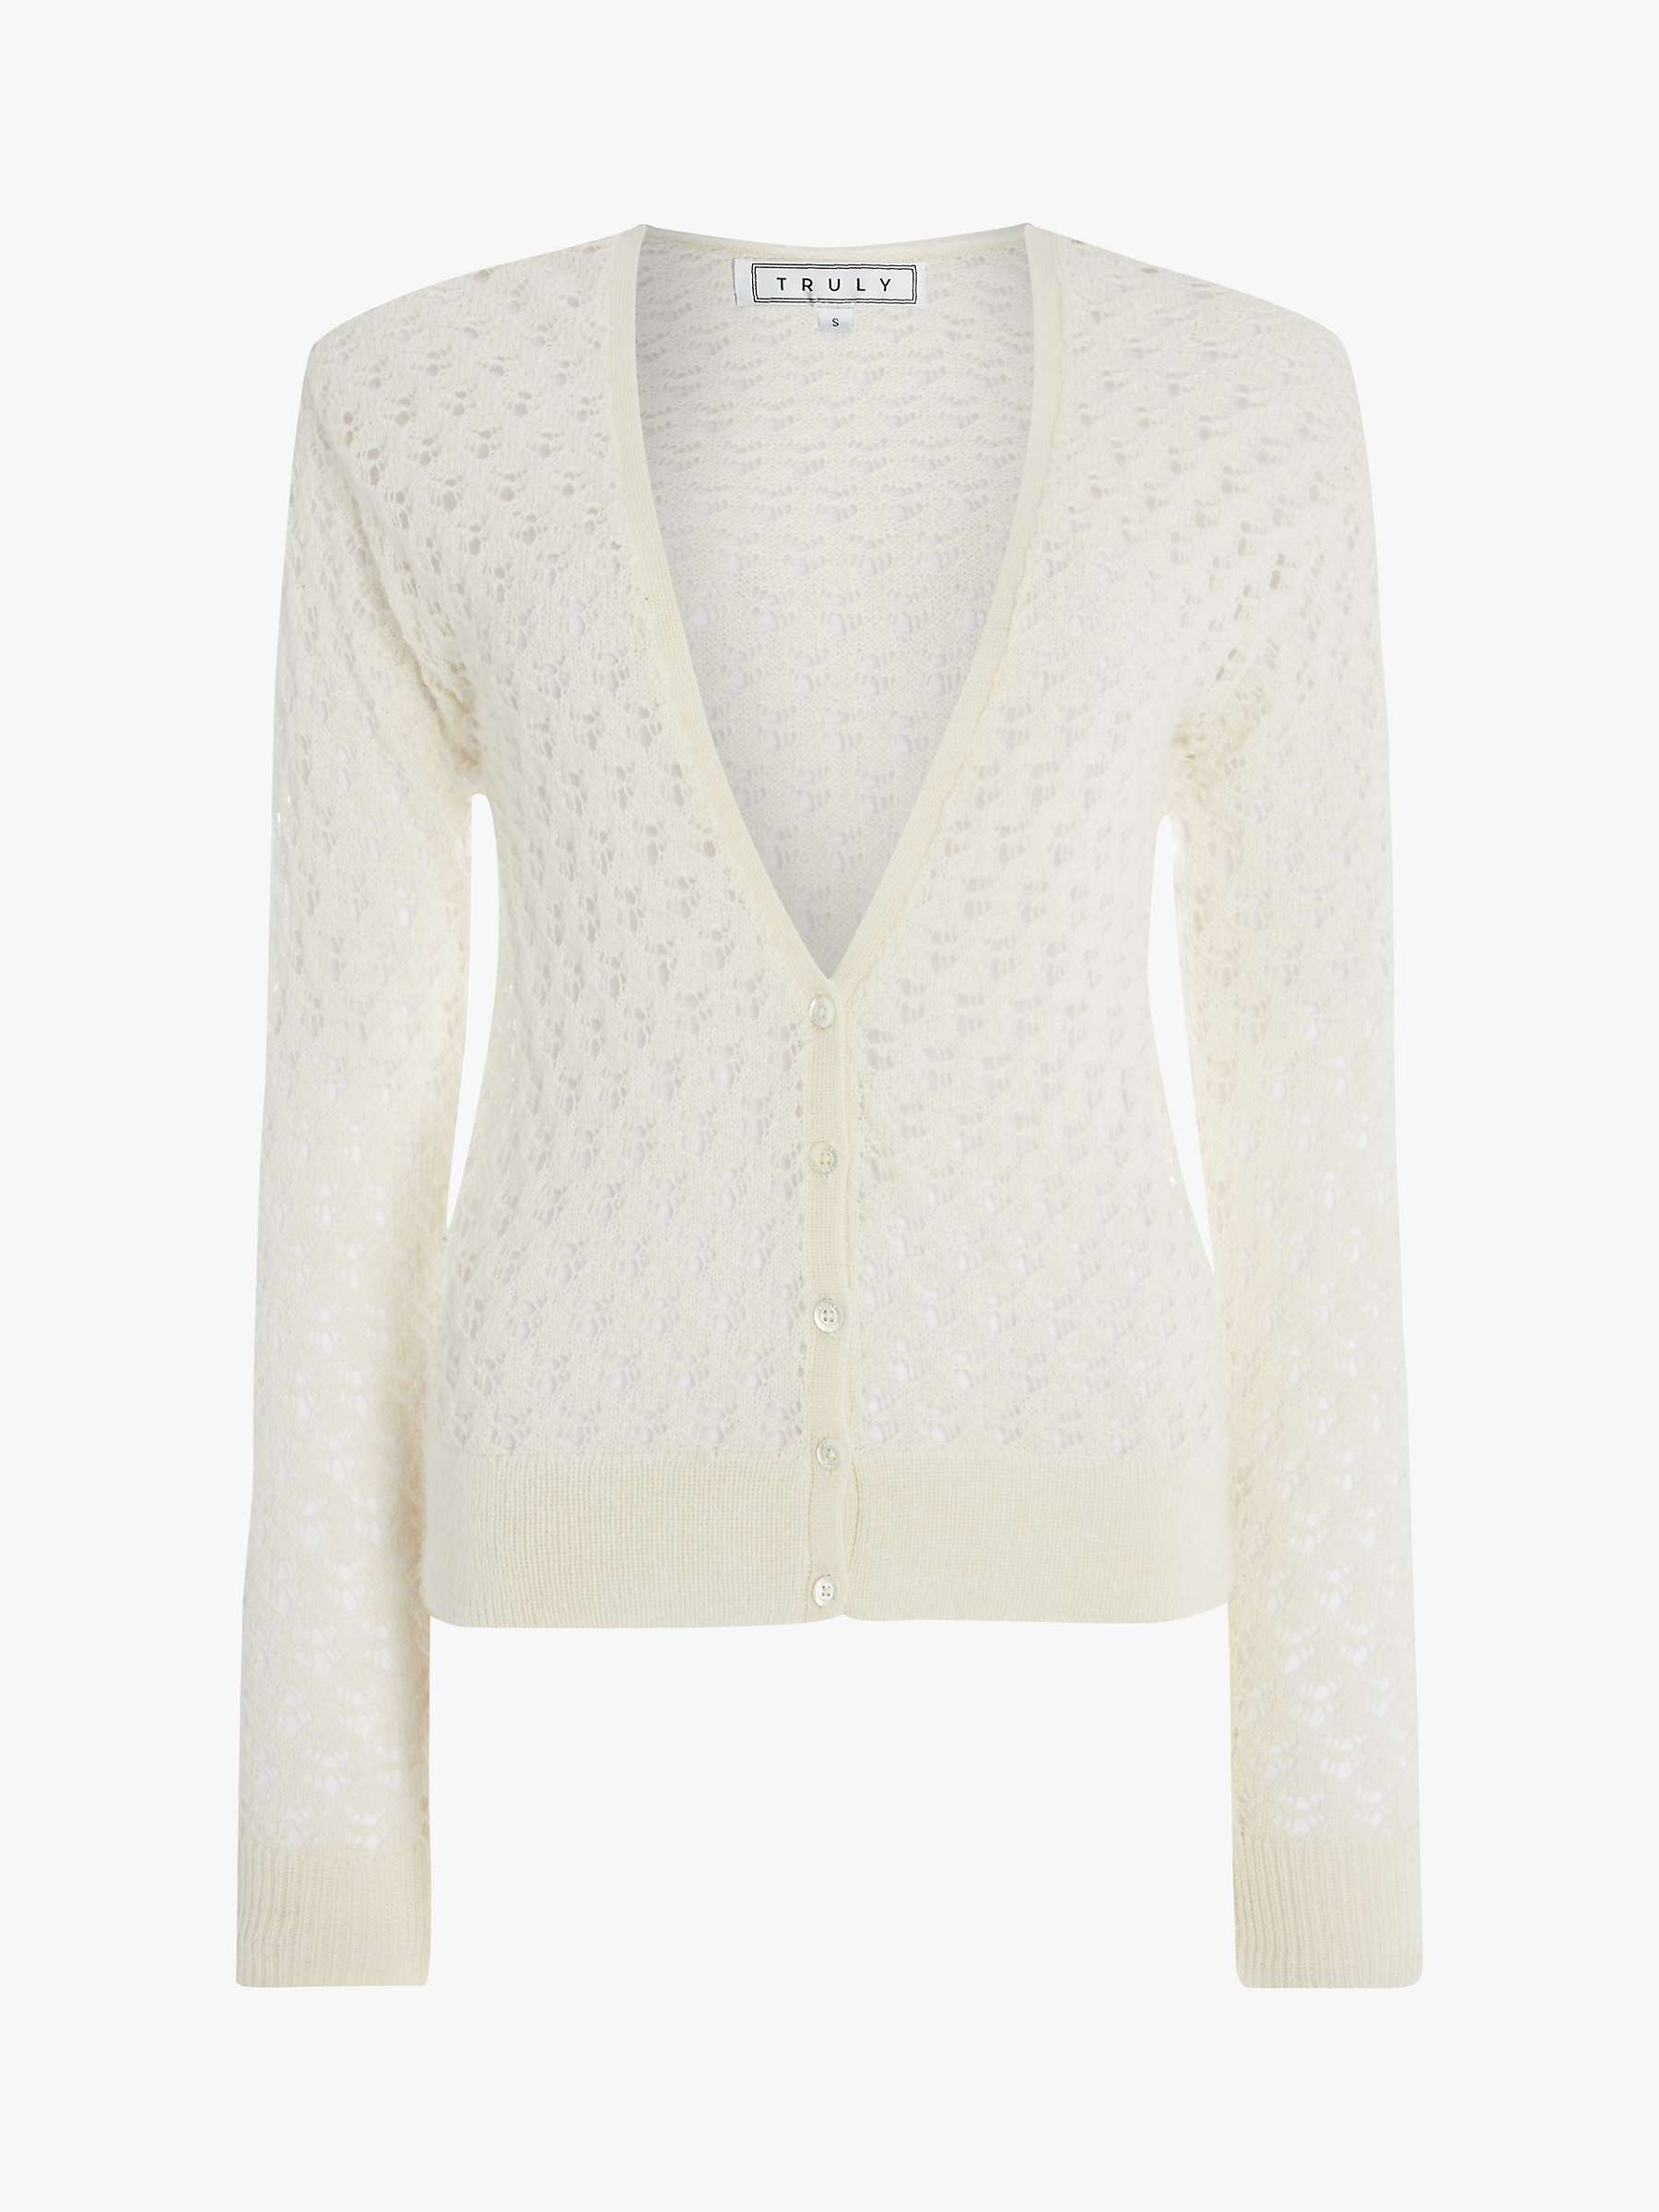 Truly Two Way Cardigan, Ivory at John Lewis & Partners